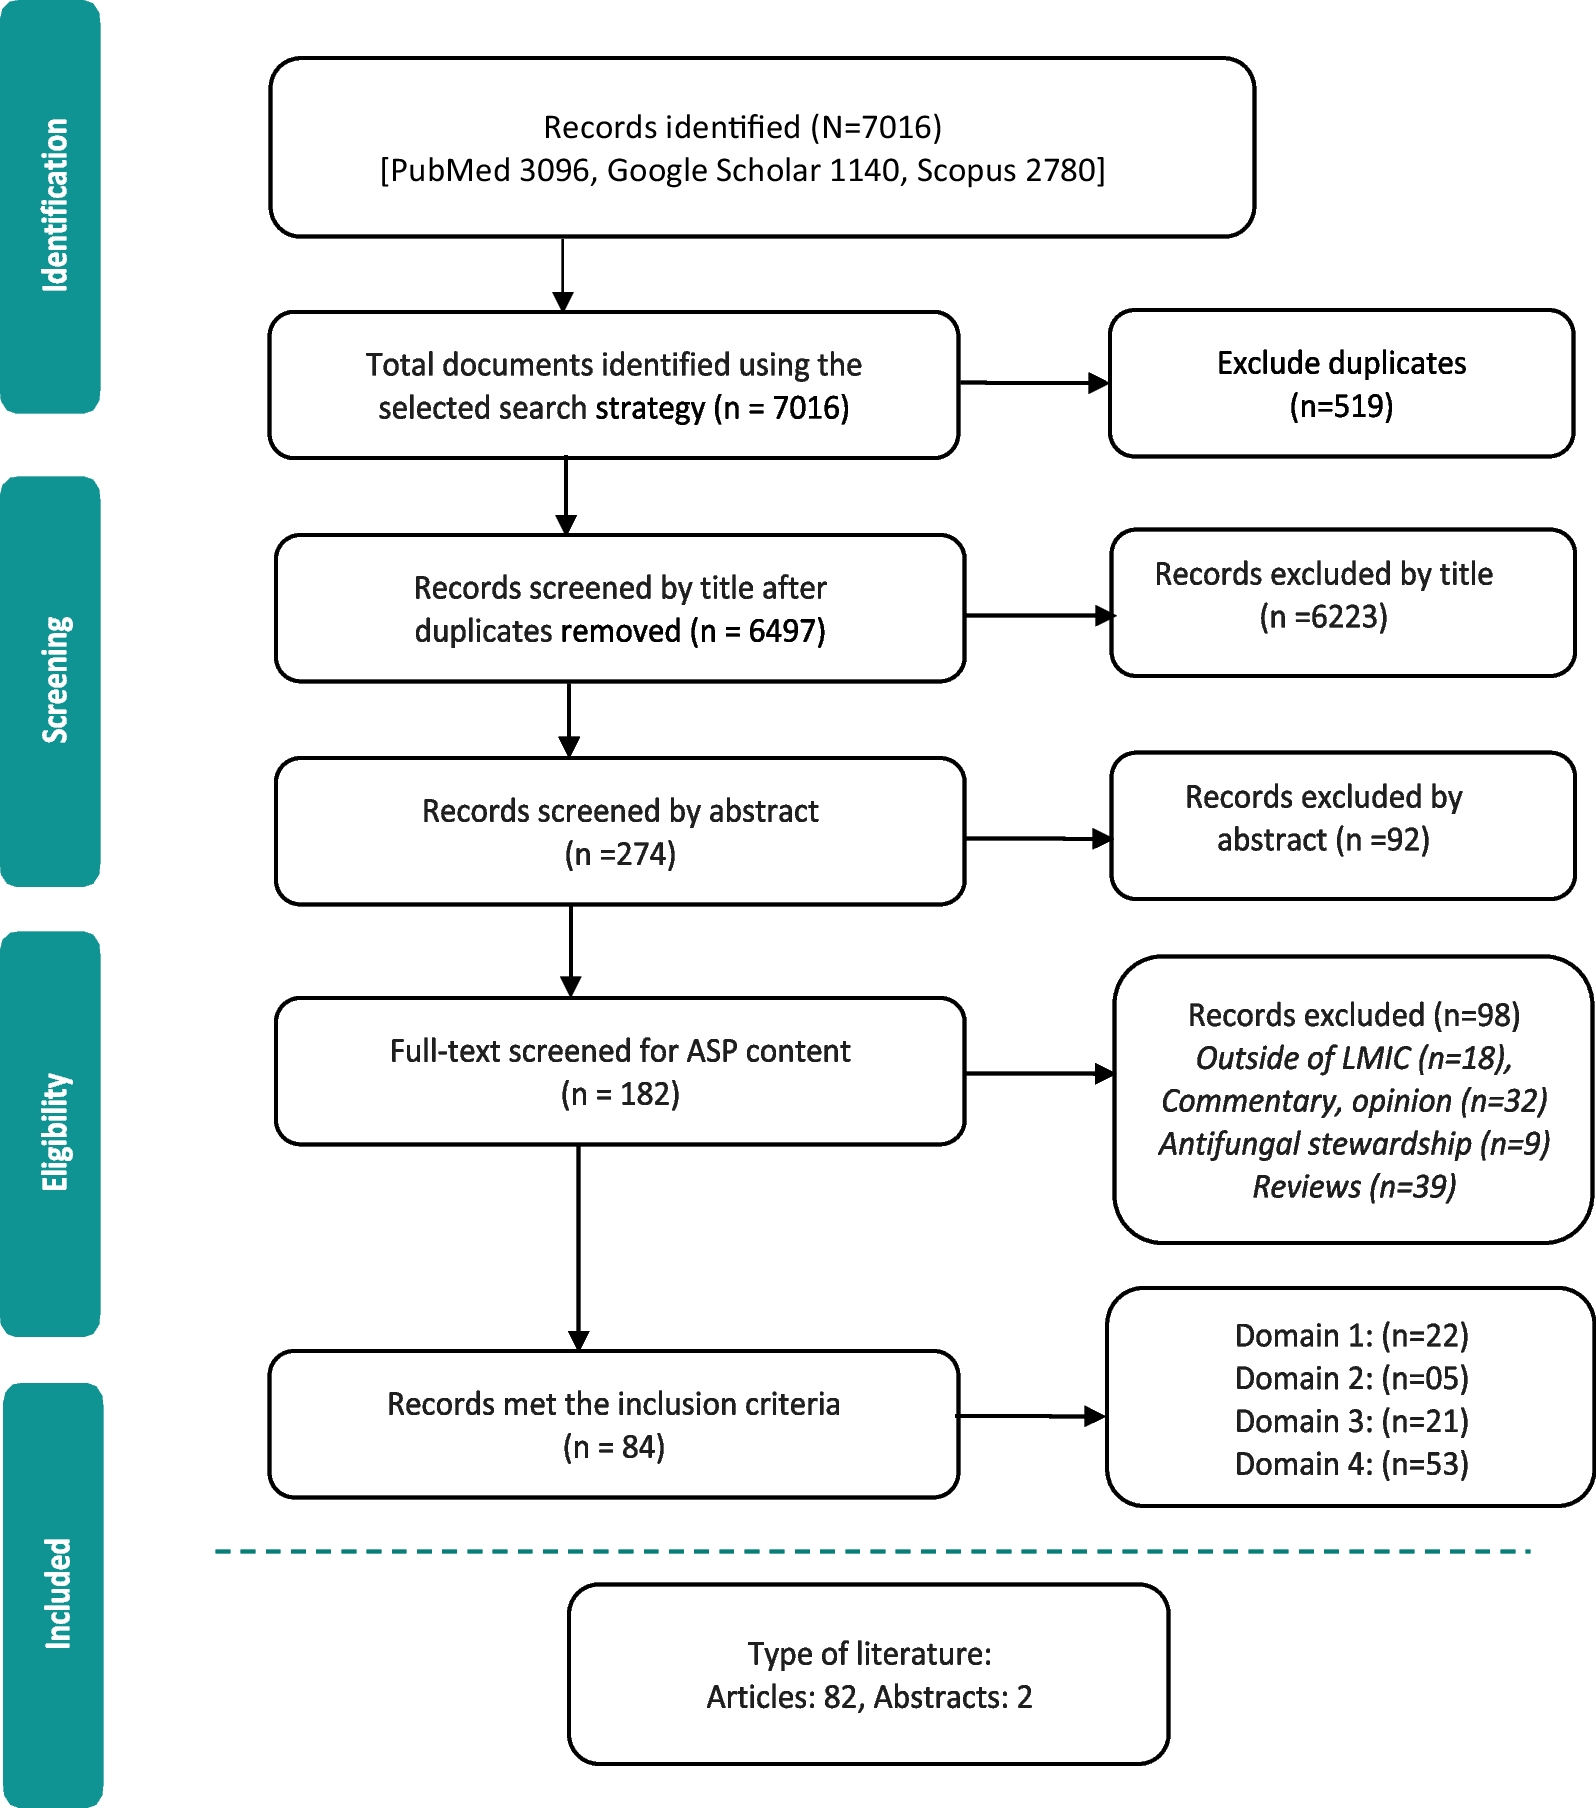 Barriers, facilitators, perceptions and impact of interventions in implementing antimicrobial stewardship programs in hospitals of low-middle and middle countries: a scoping review